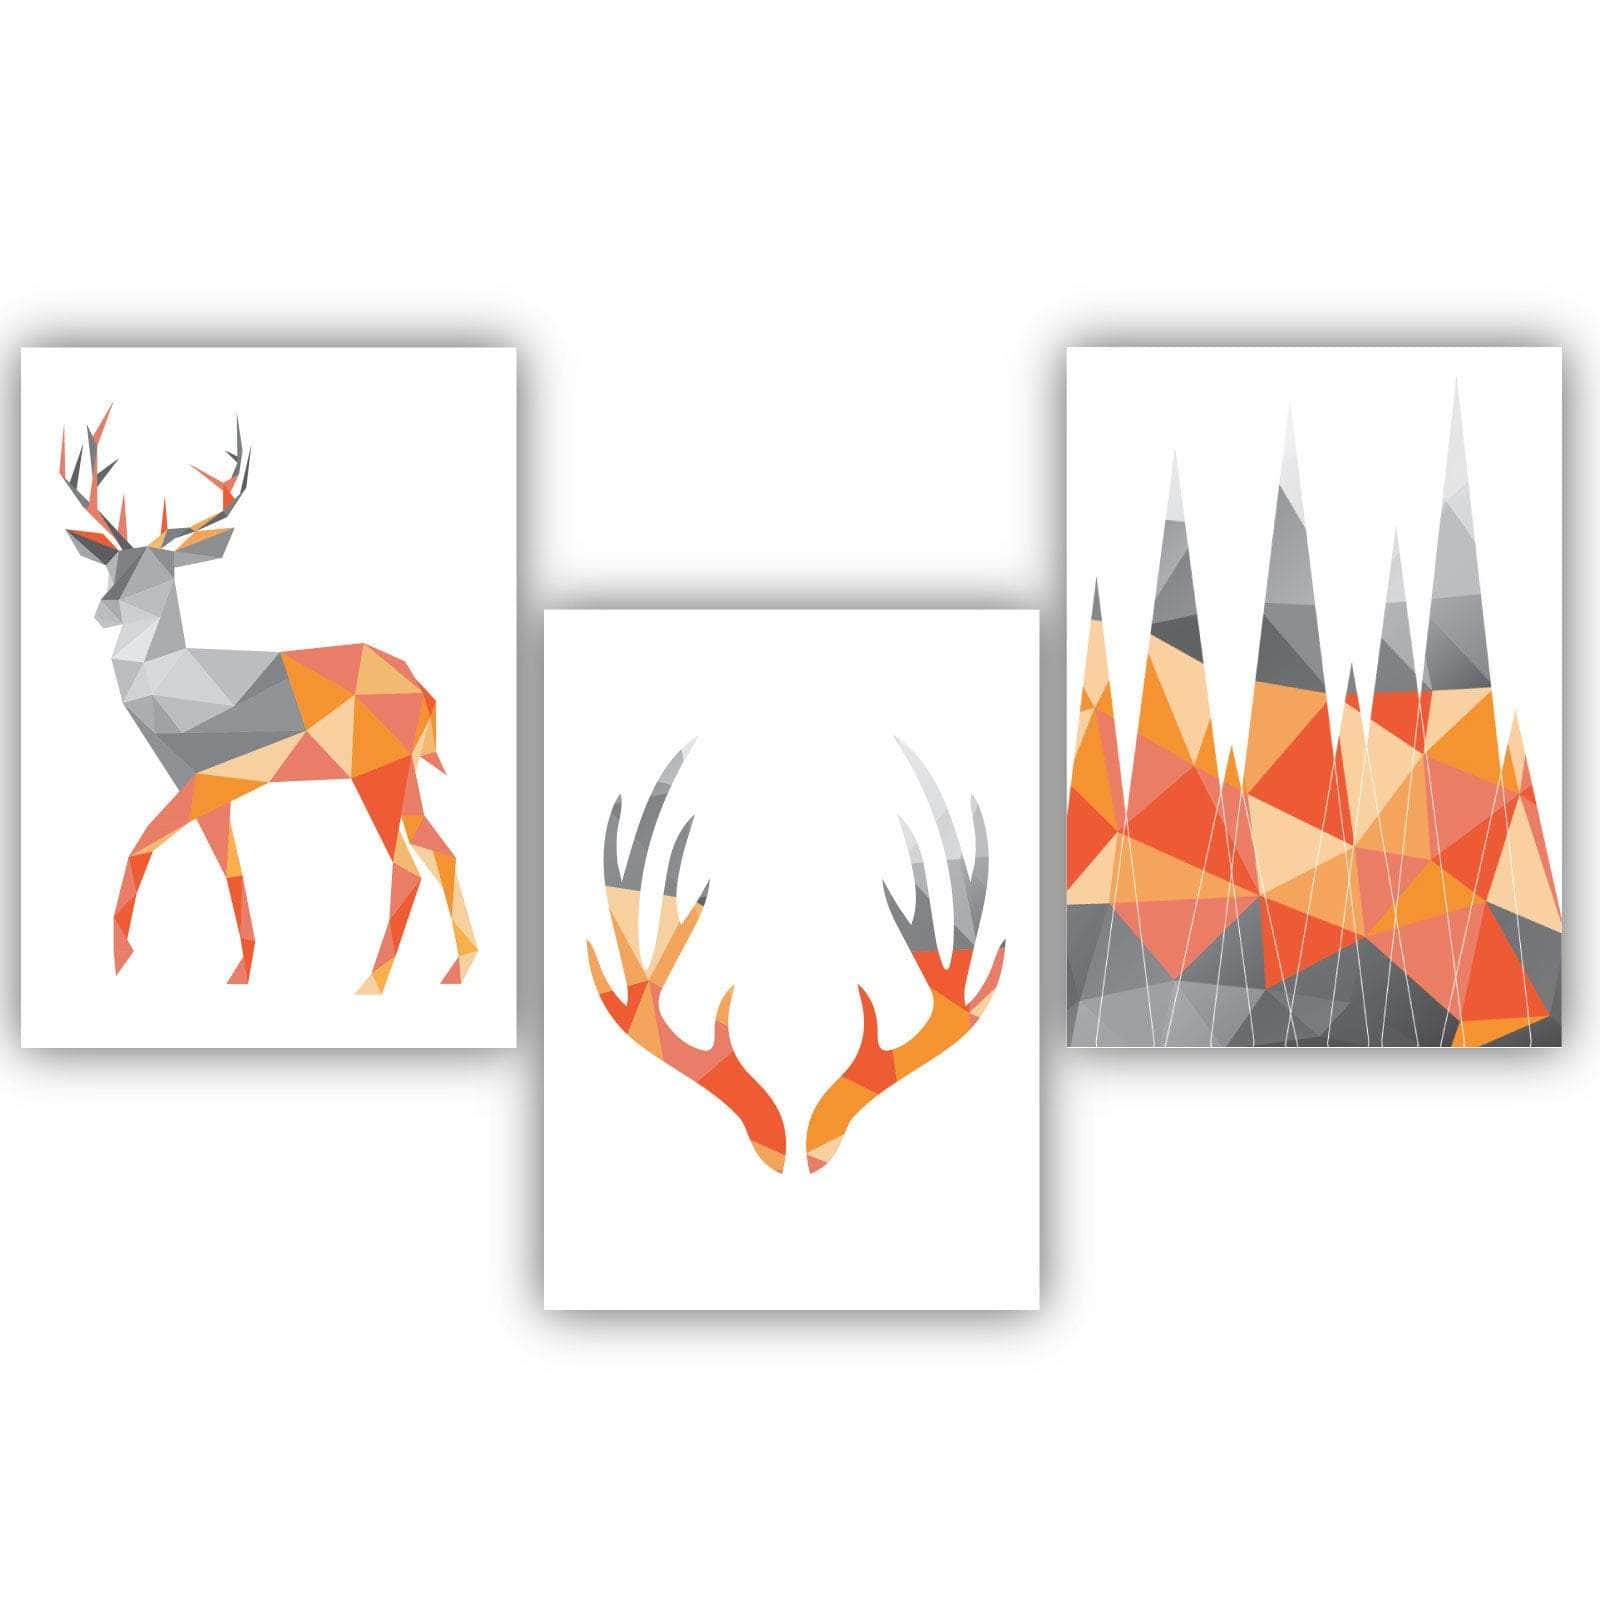 GEOMETRIC set of 3 ORANGE & Grey Art Prints STAG Antlers and Mountains